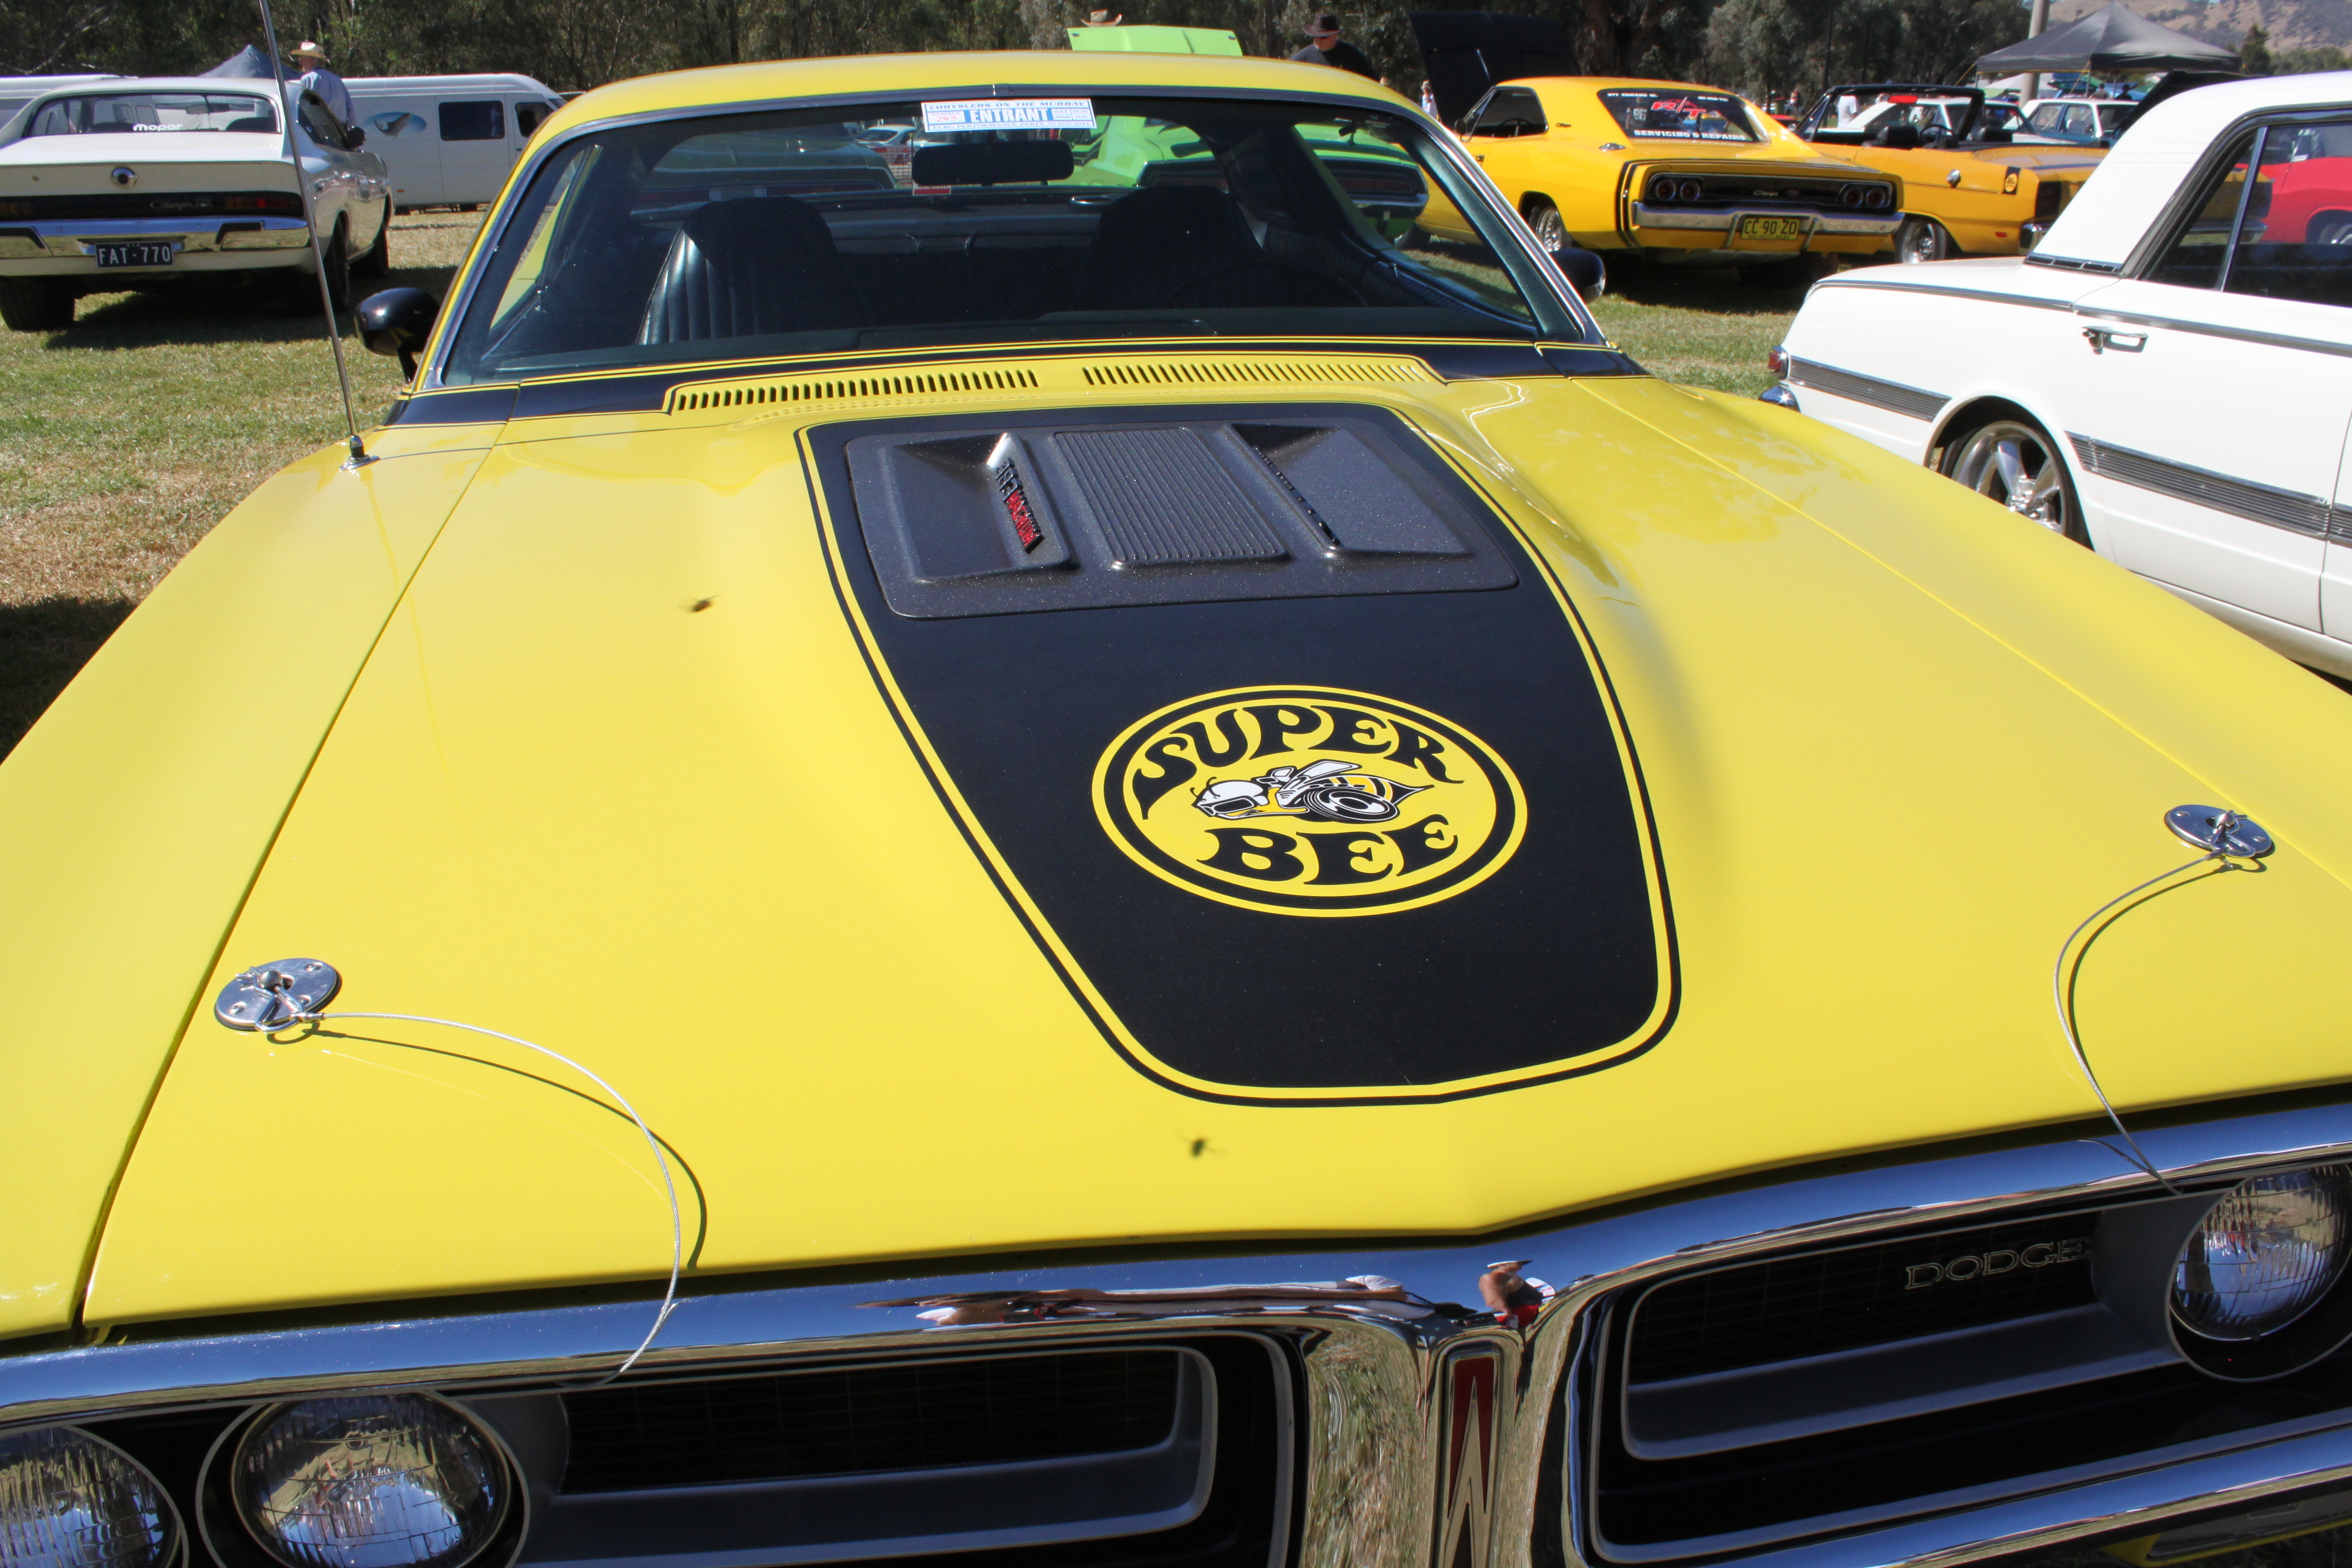 File:1971 Dodge Charger Super Bee (16368030743).jpg - Wikimedia Commons